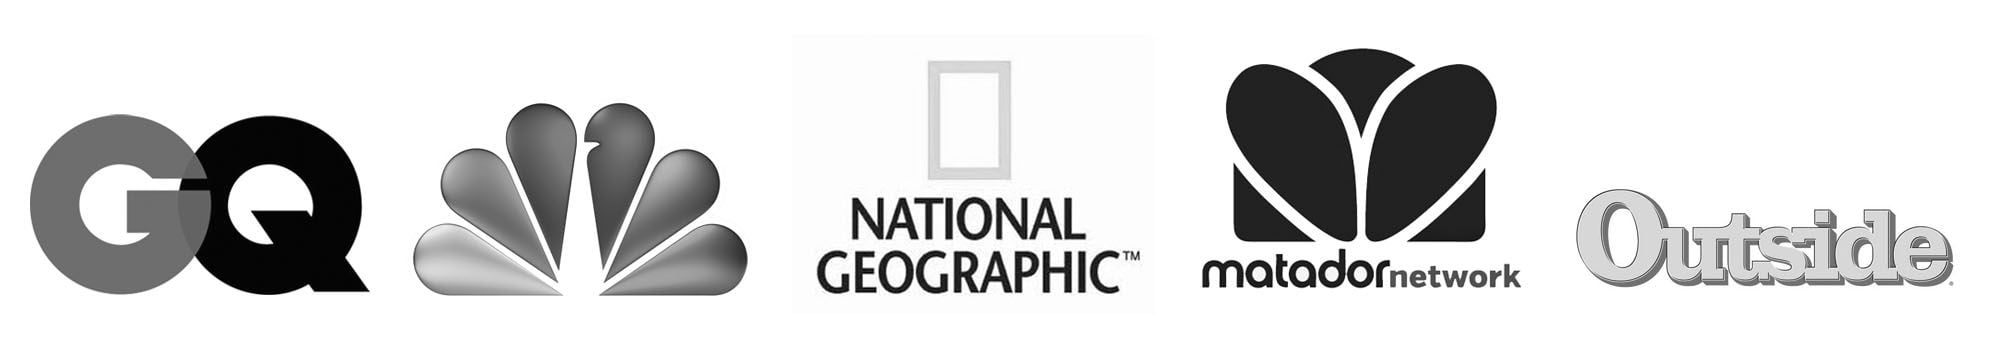 Logos of publications & networks that have featured Earth Trekkers - GQ, CNBC, Nat Geo, Matador Network, Outside.